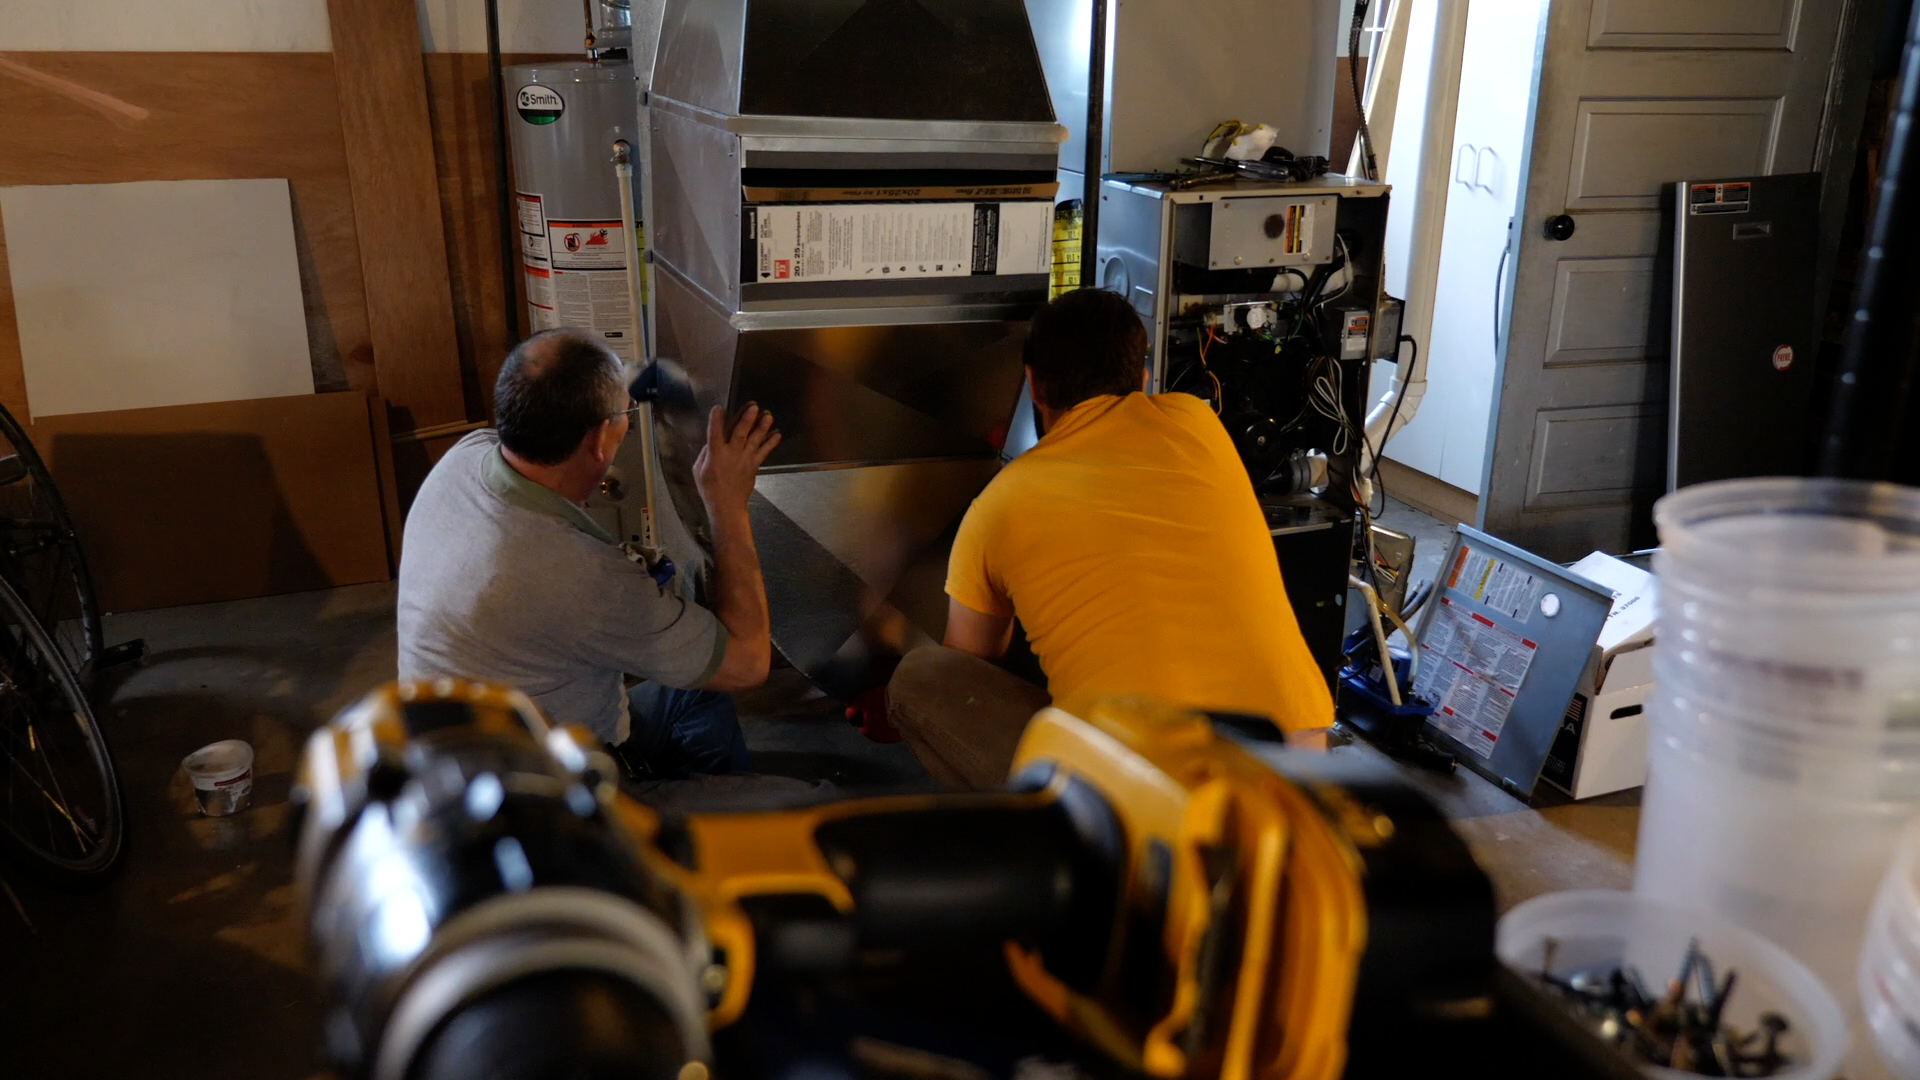 Two men working on an HVAC system in basement